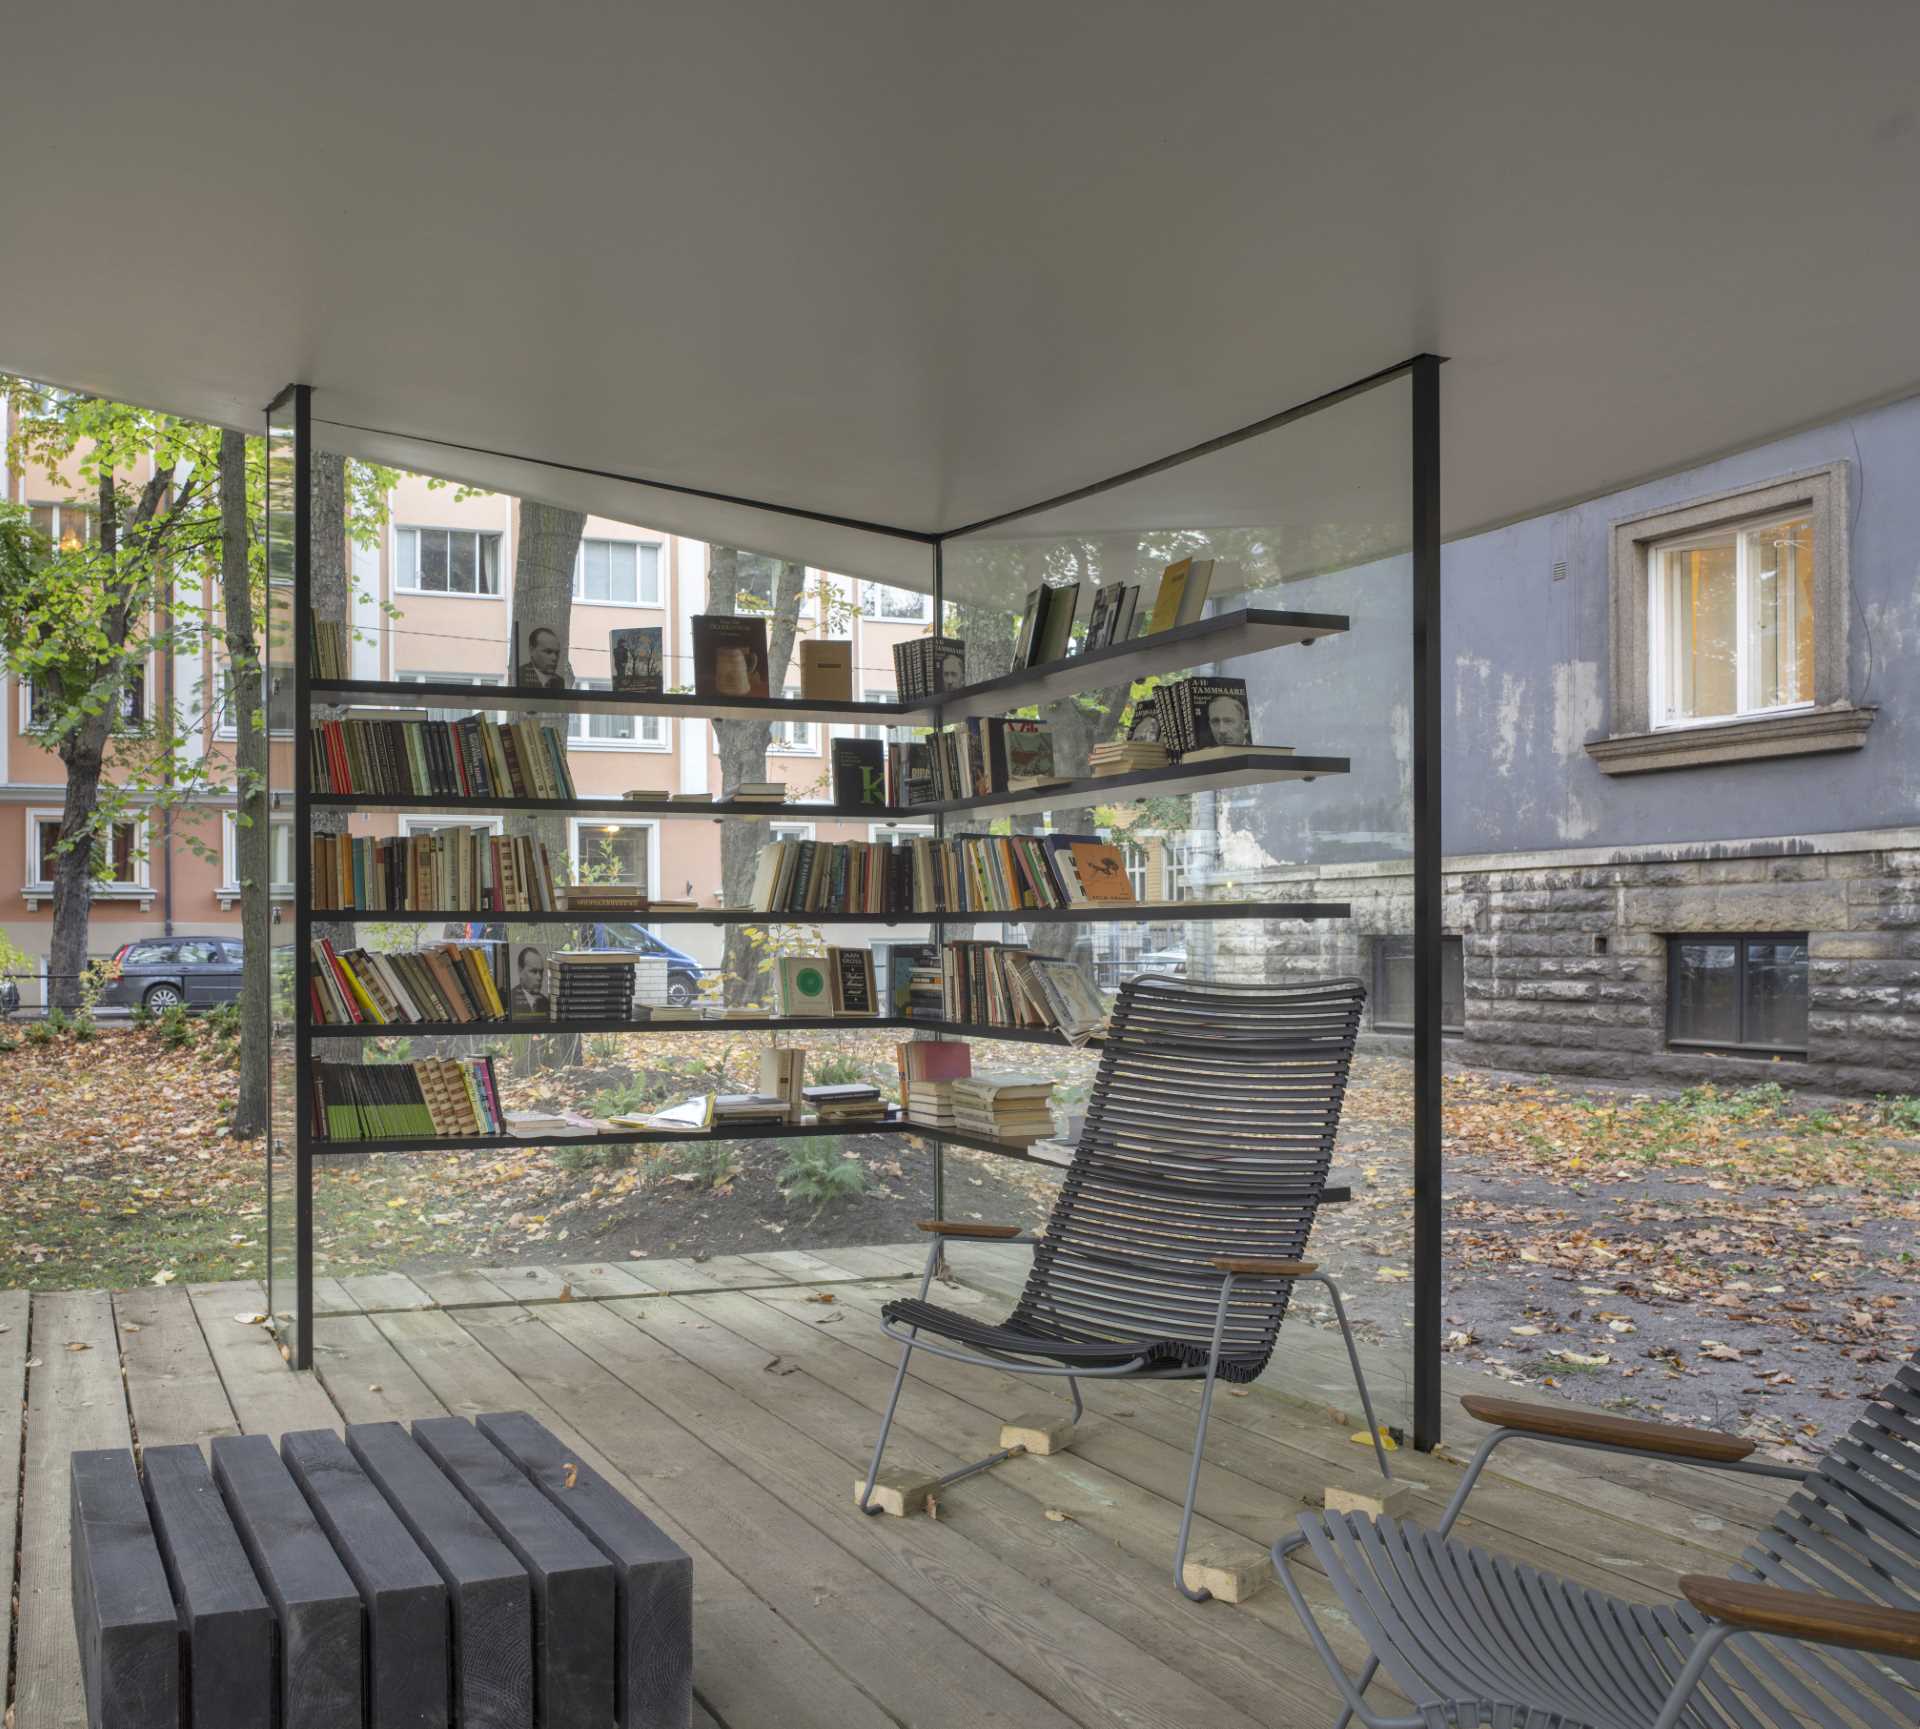 A small public library with glass walls and a white roof that's inspired by a sheet of paper.